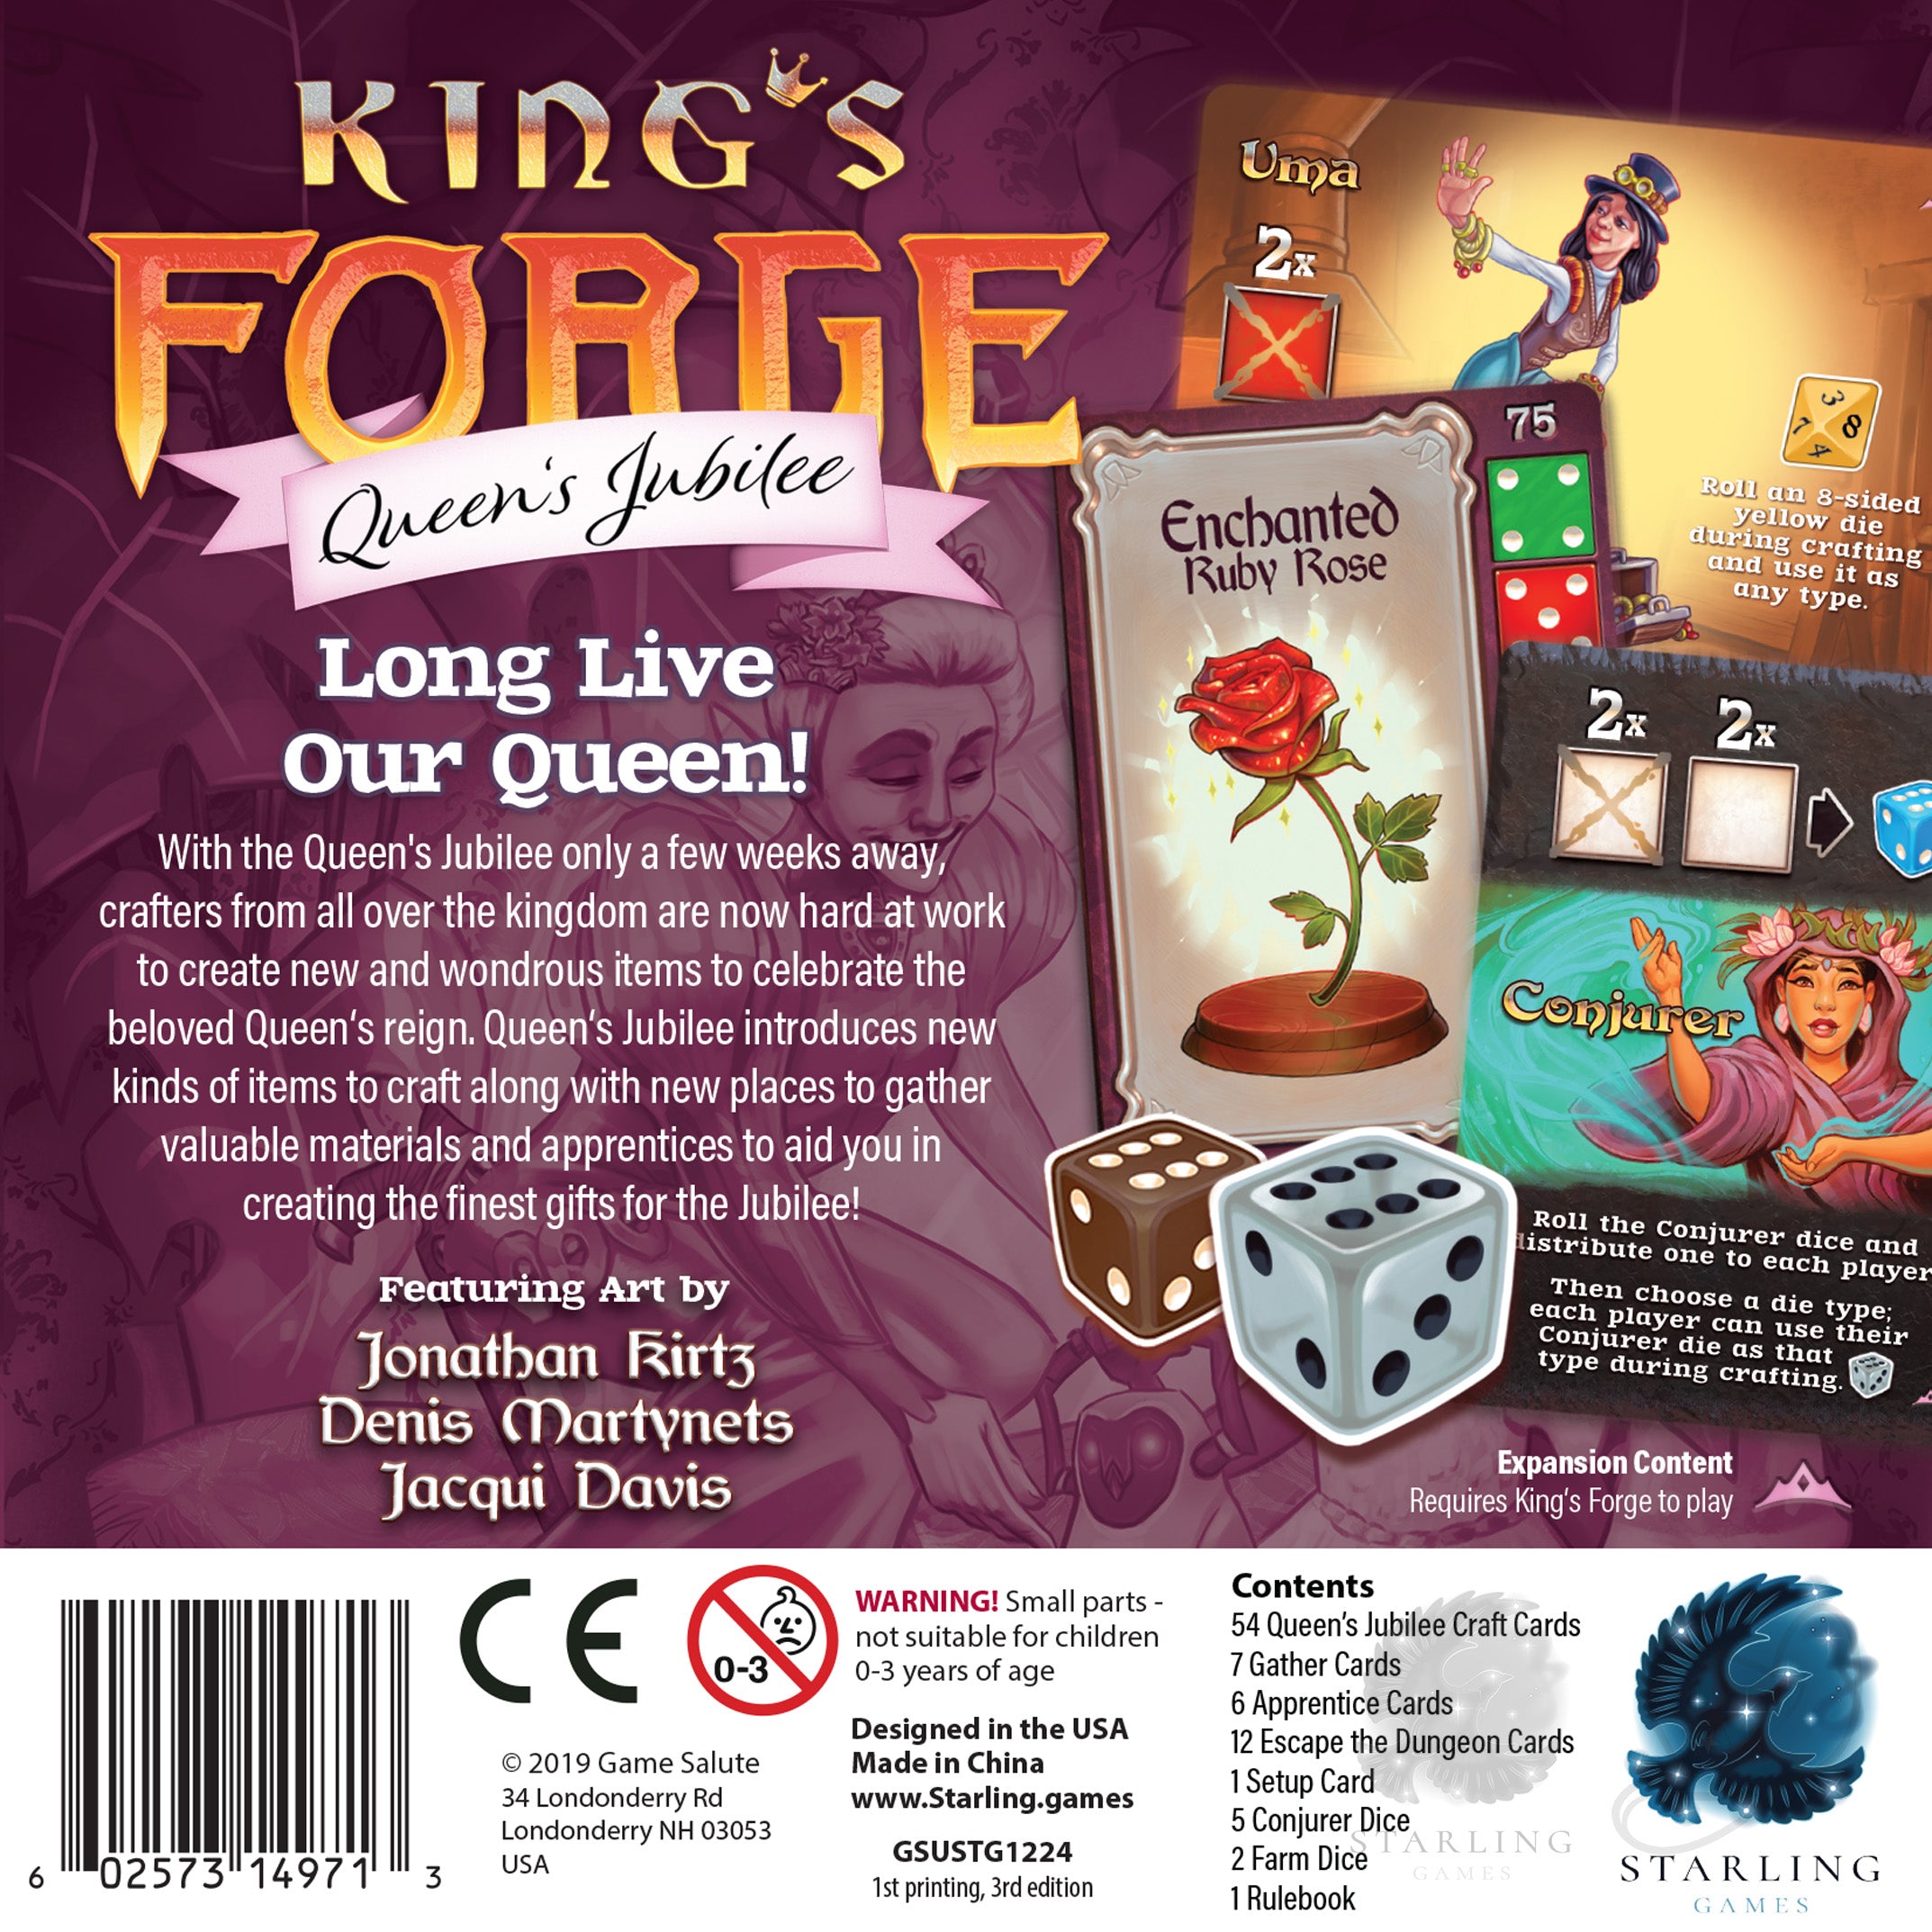 Kings Forge Queens Jubilee 3rd Edition